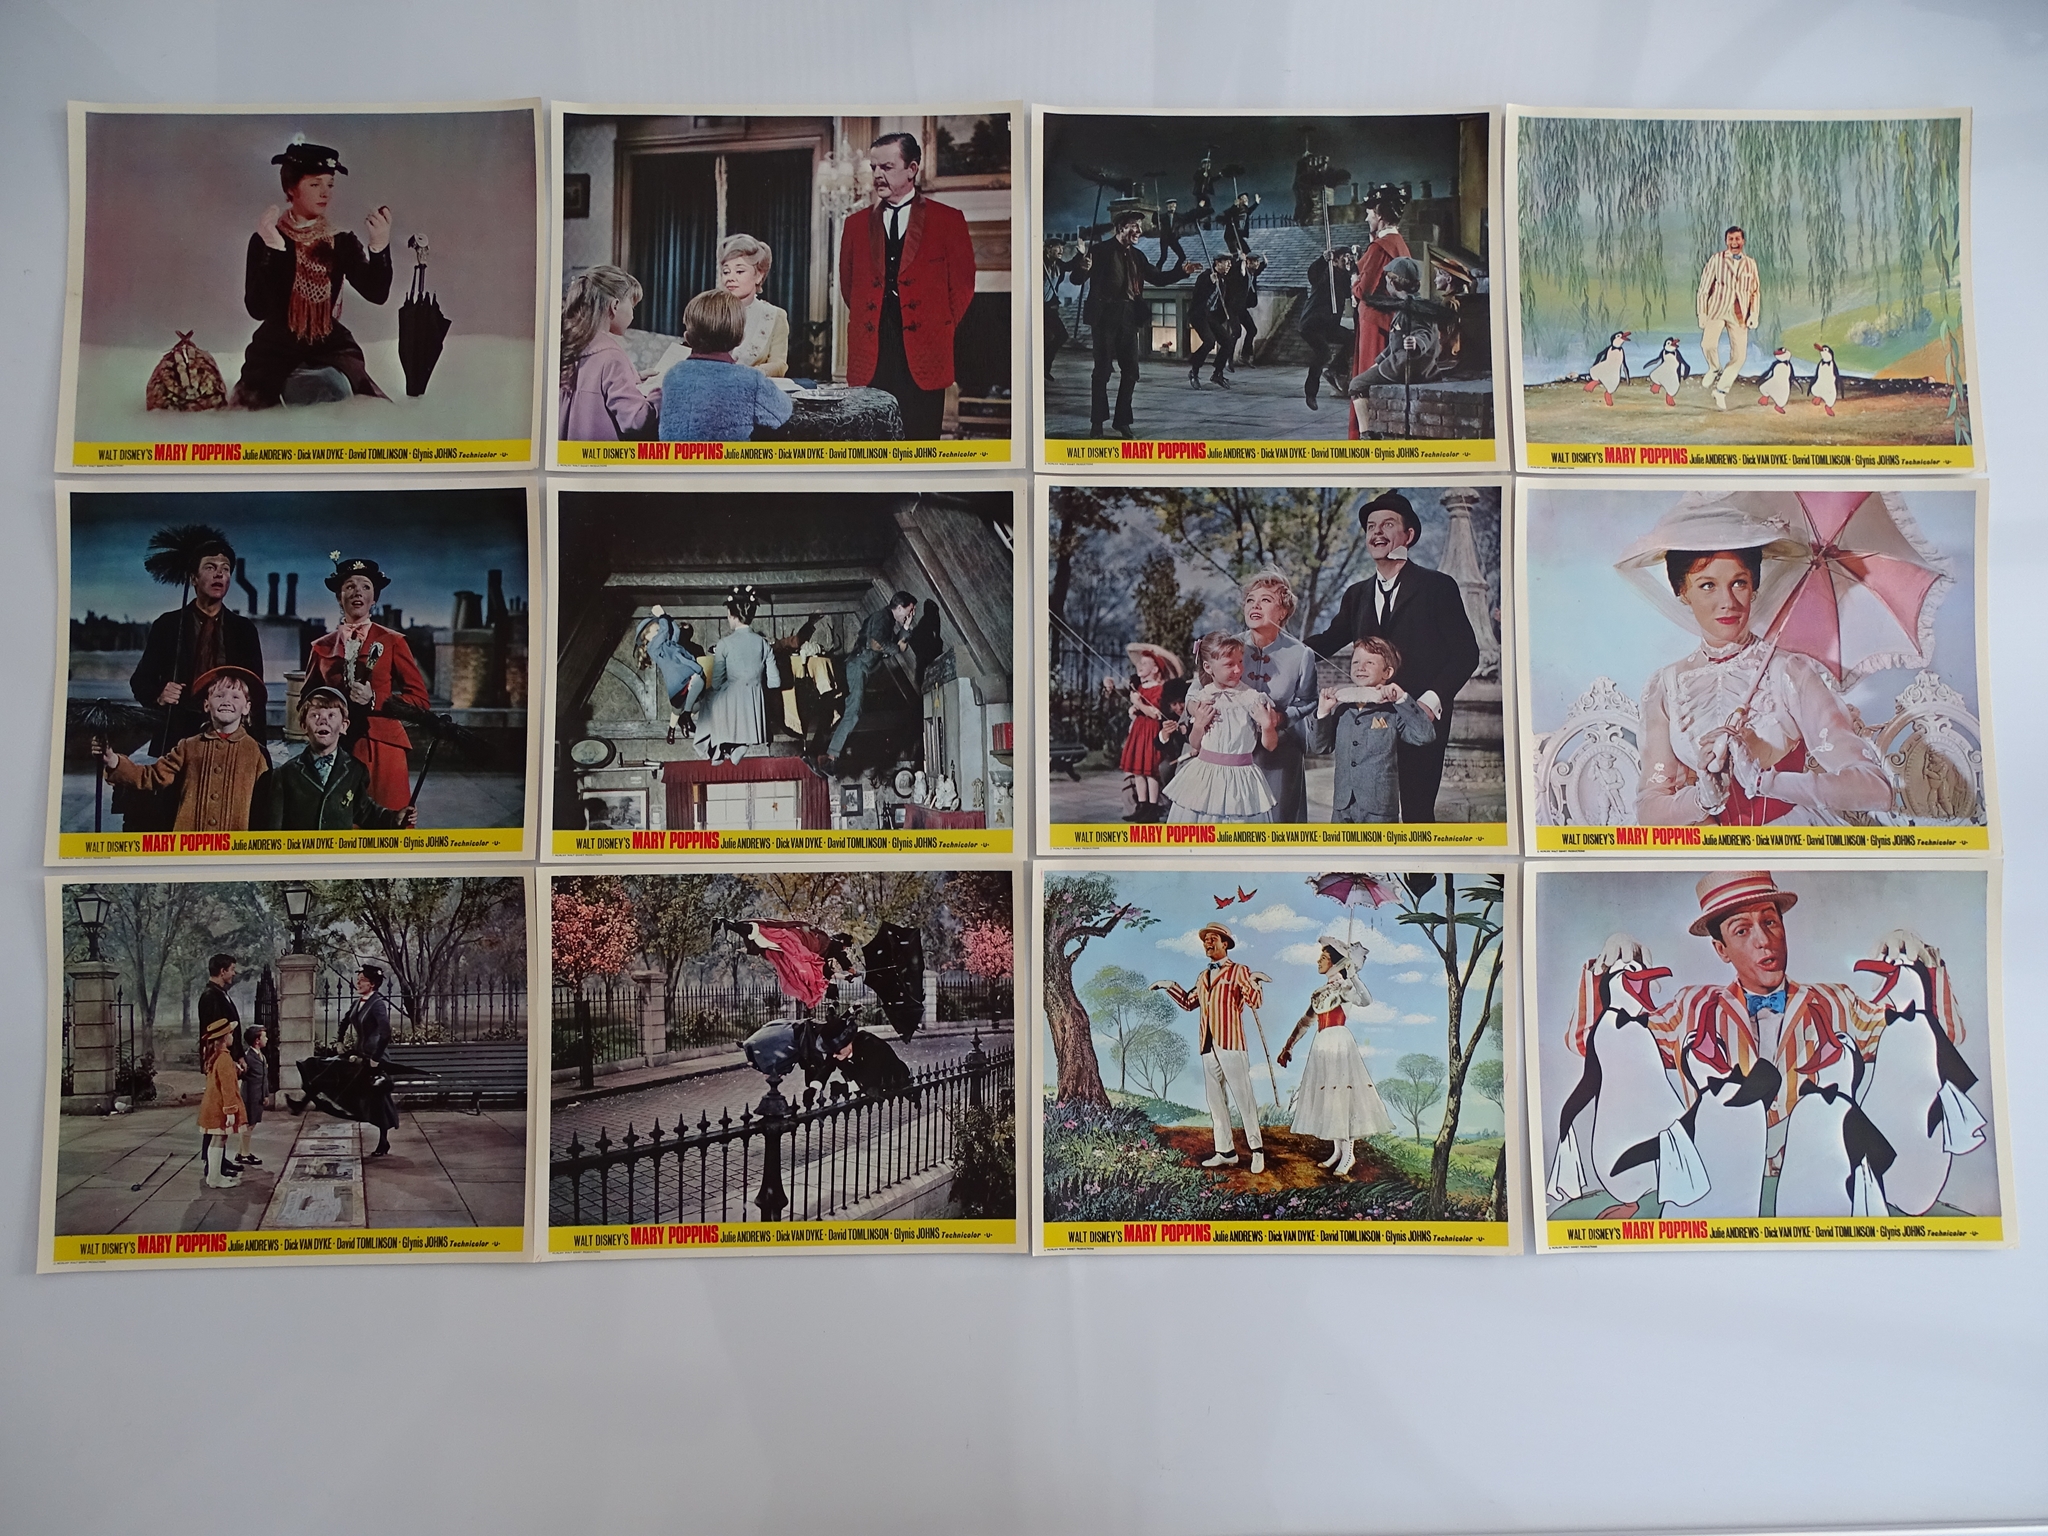 MARY POPPINS (1964) - Complete set of 12 x British Front of House Lobby Cards - RARE SET - Flat/